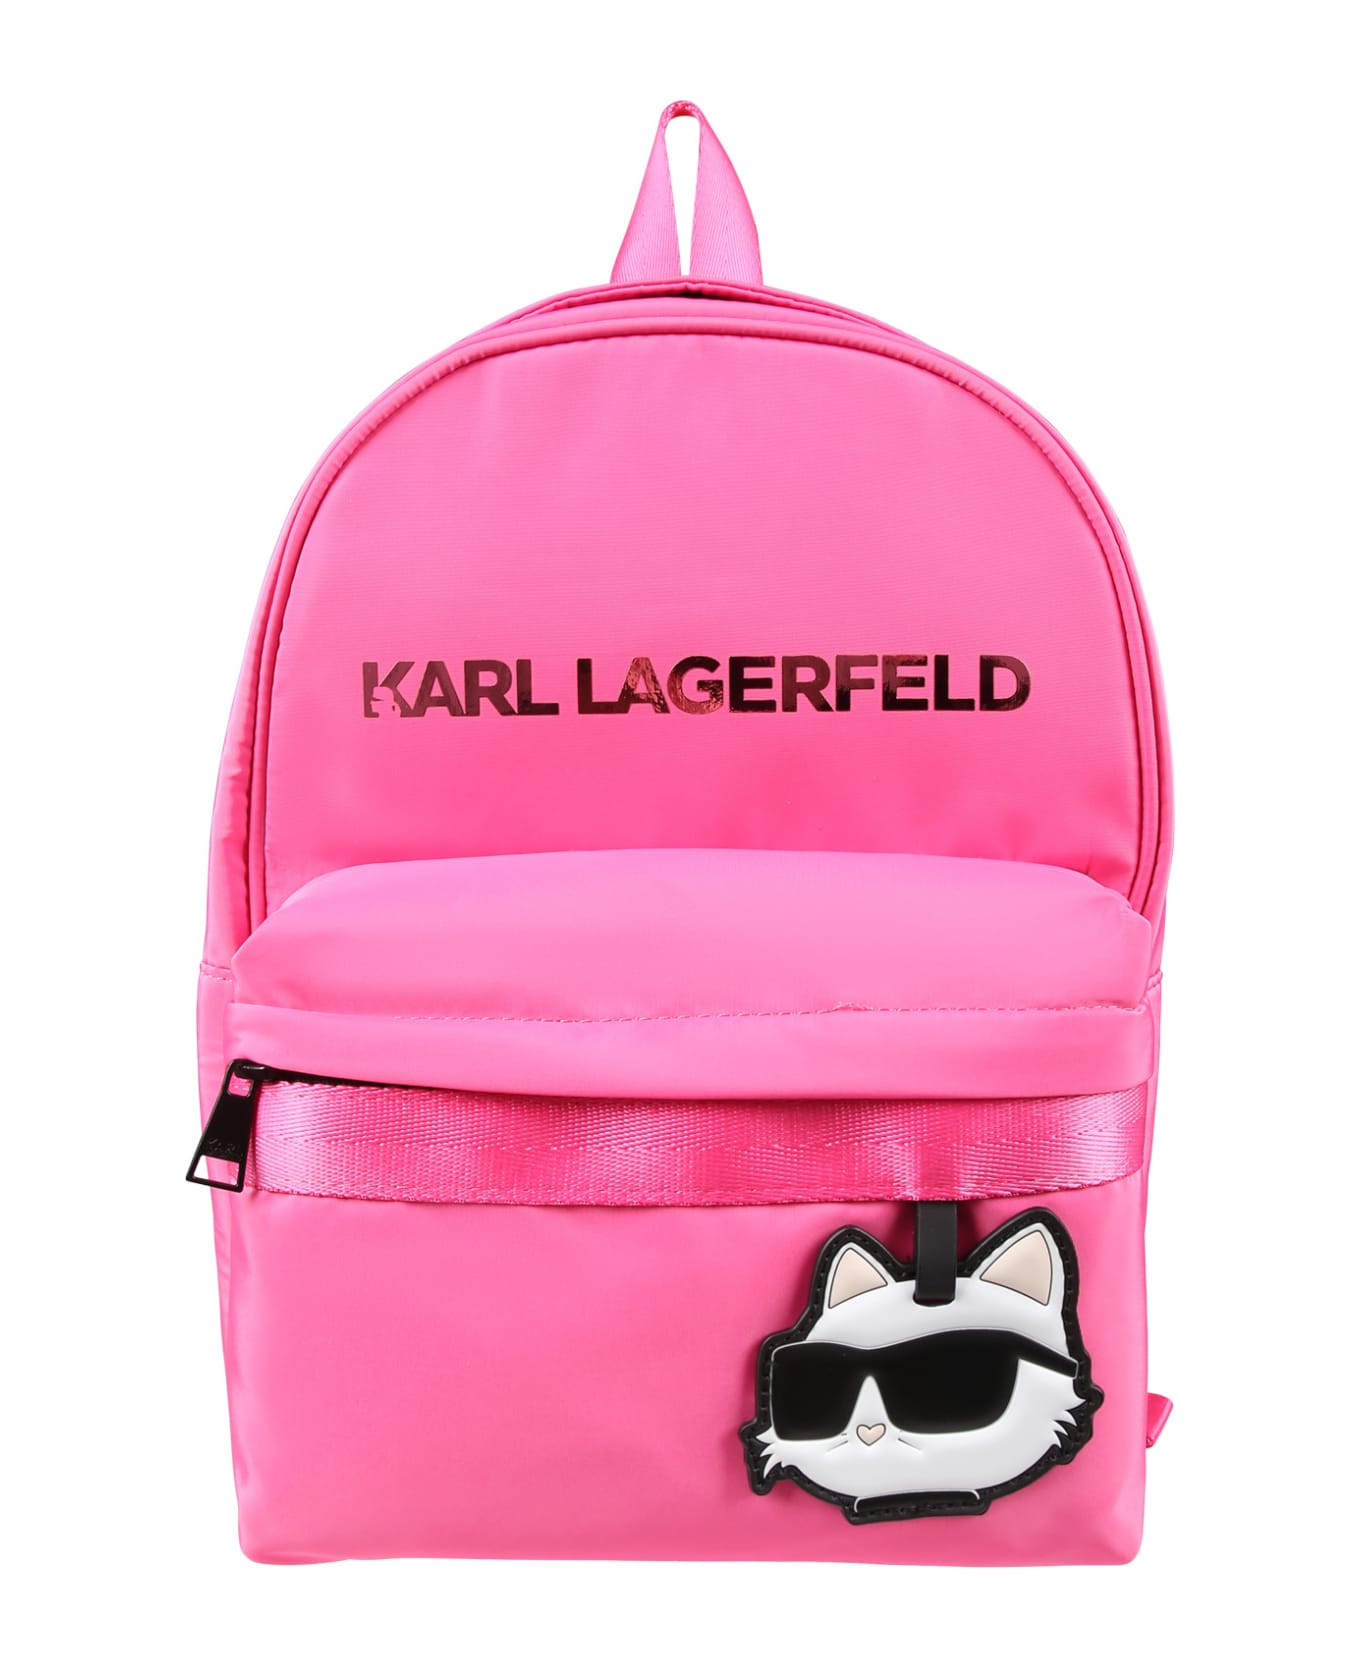 Karl Lagerfeld Kids Fuchsia Backpack For Girl With Logo And Choupette - Fuchsia